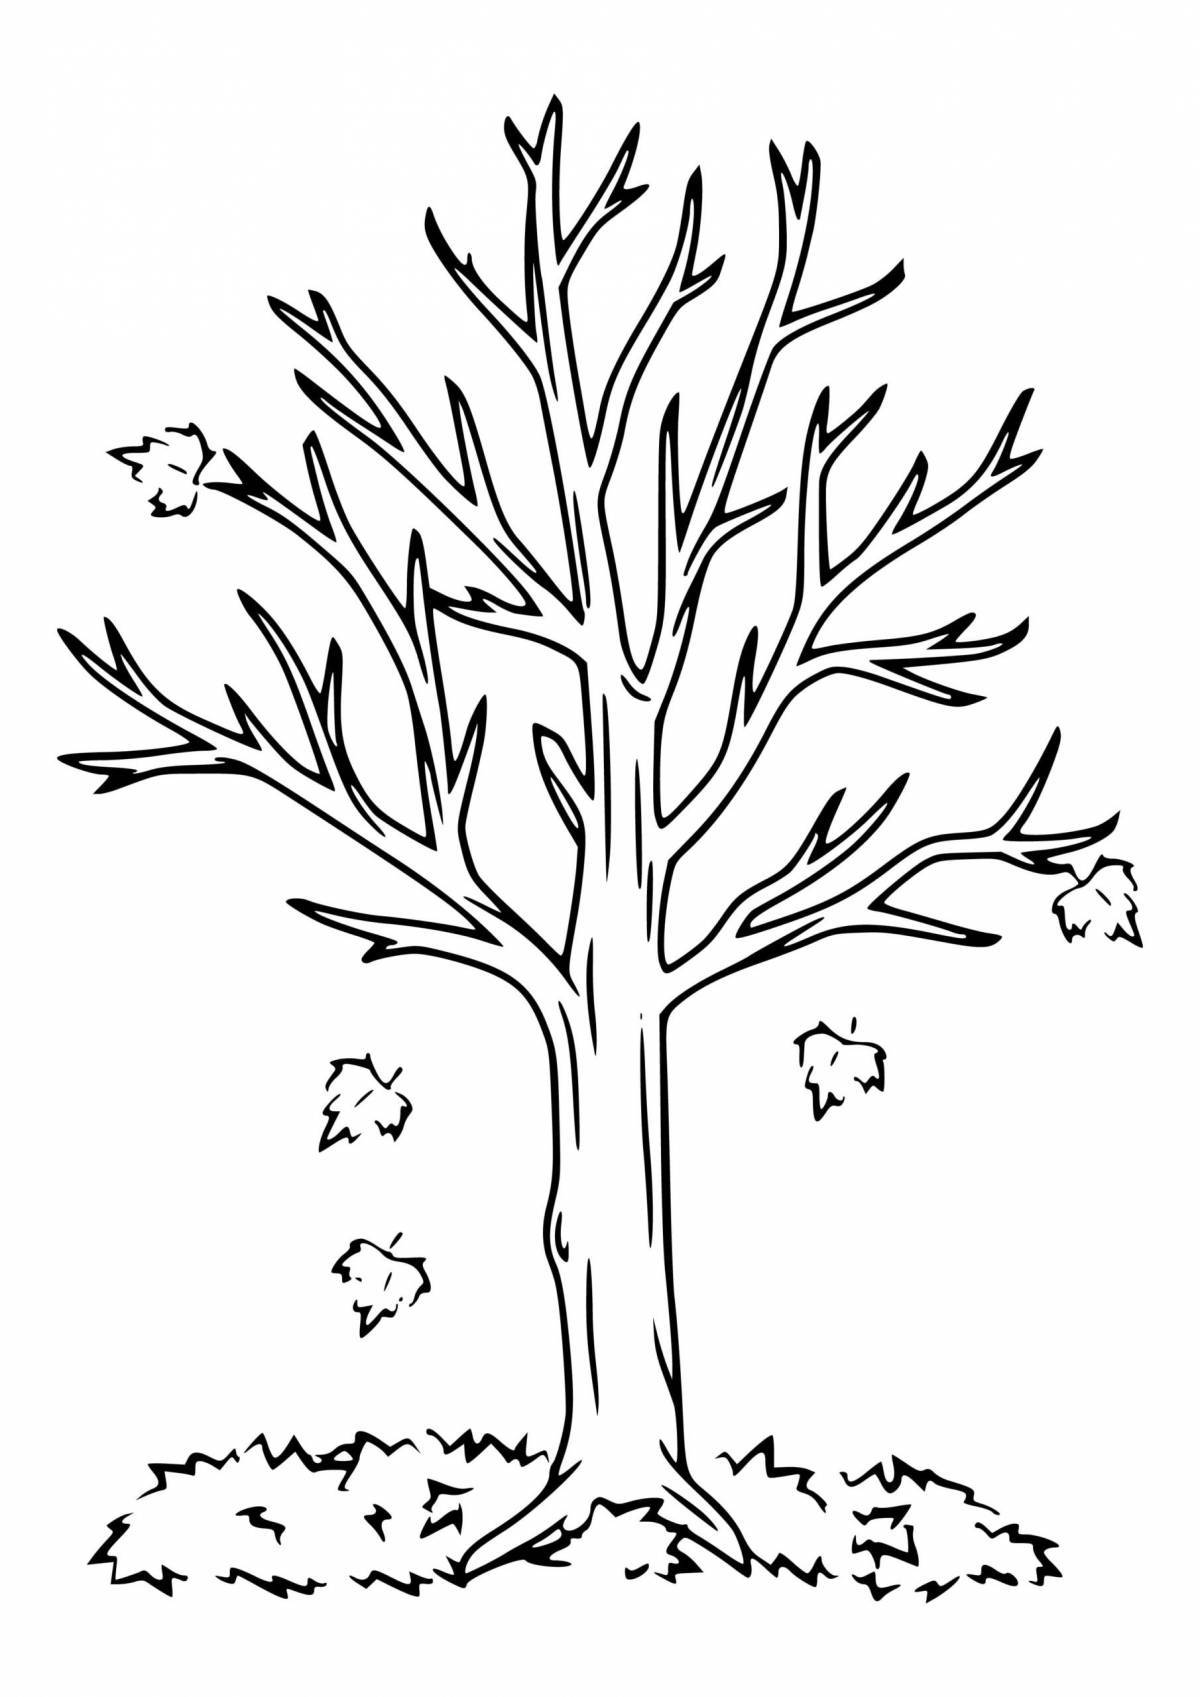 Coloring book cheerful tree without leaves for children